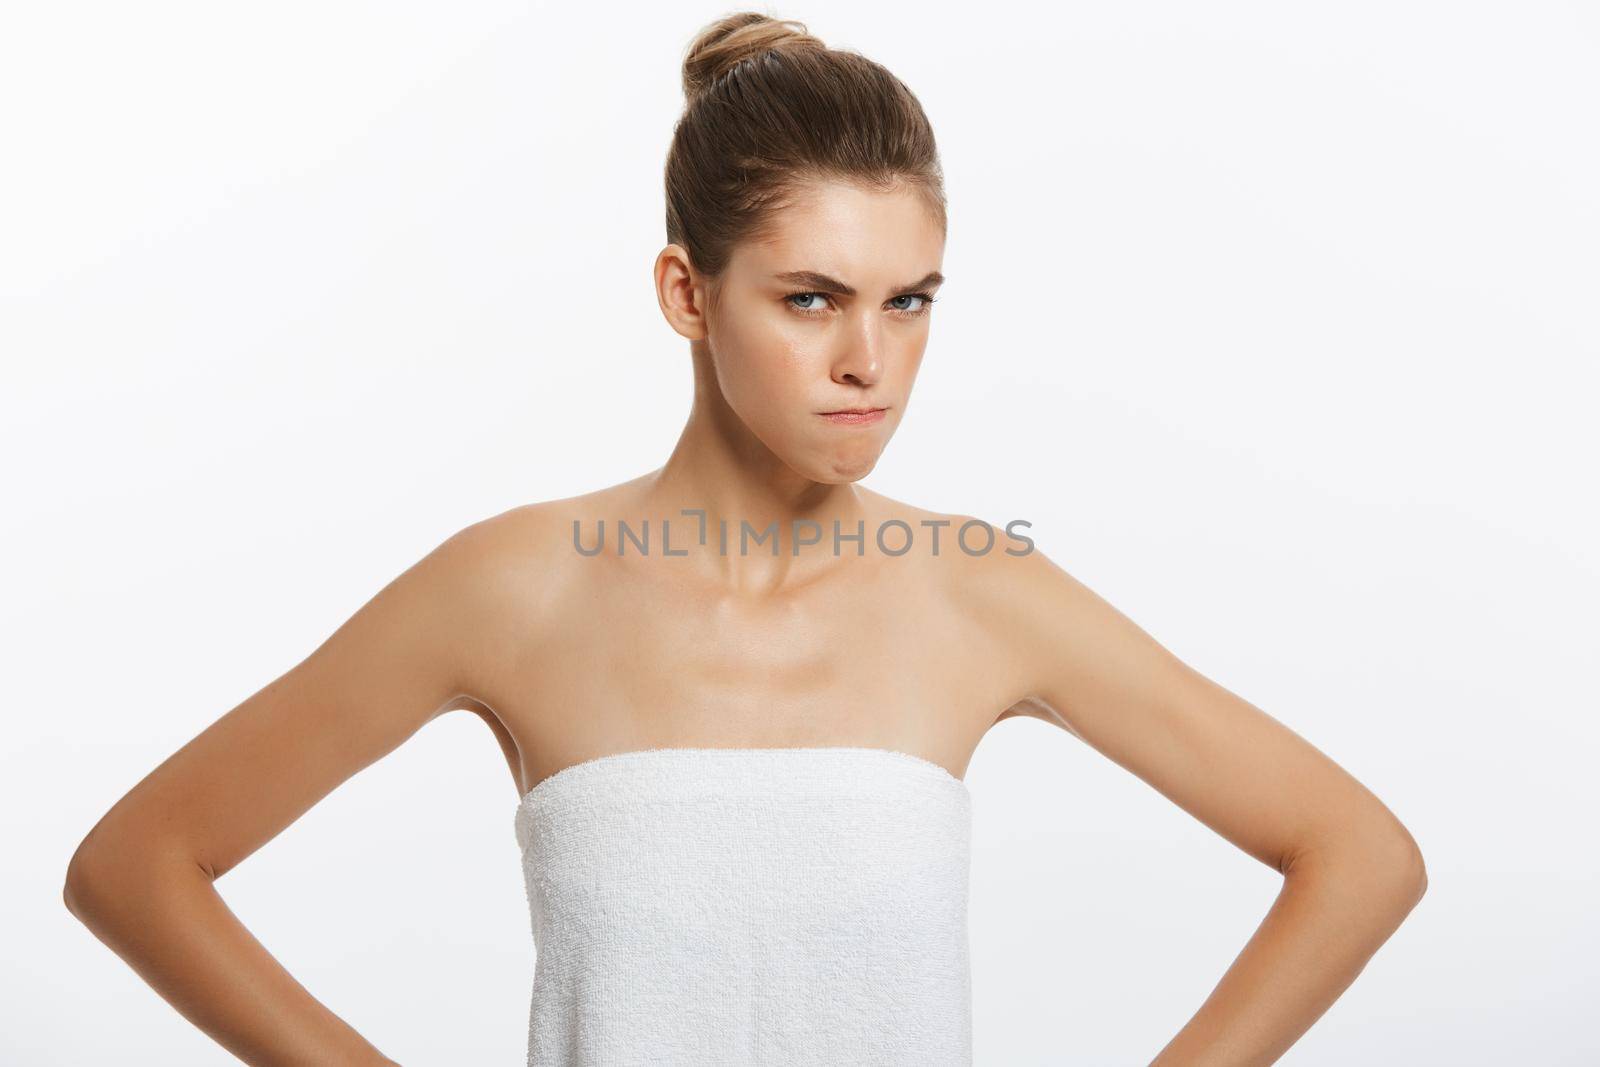 Frustrated upset mad angry woman with towel covering breast. Isolated on white.